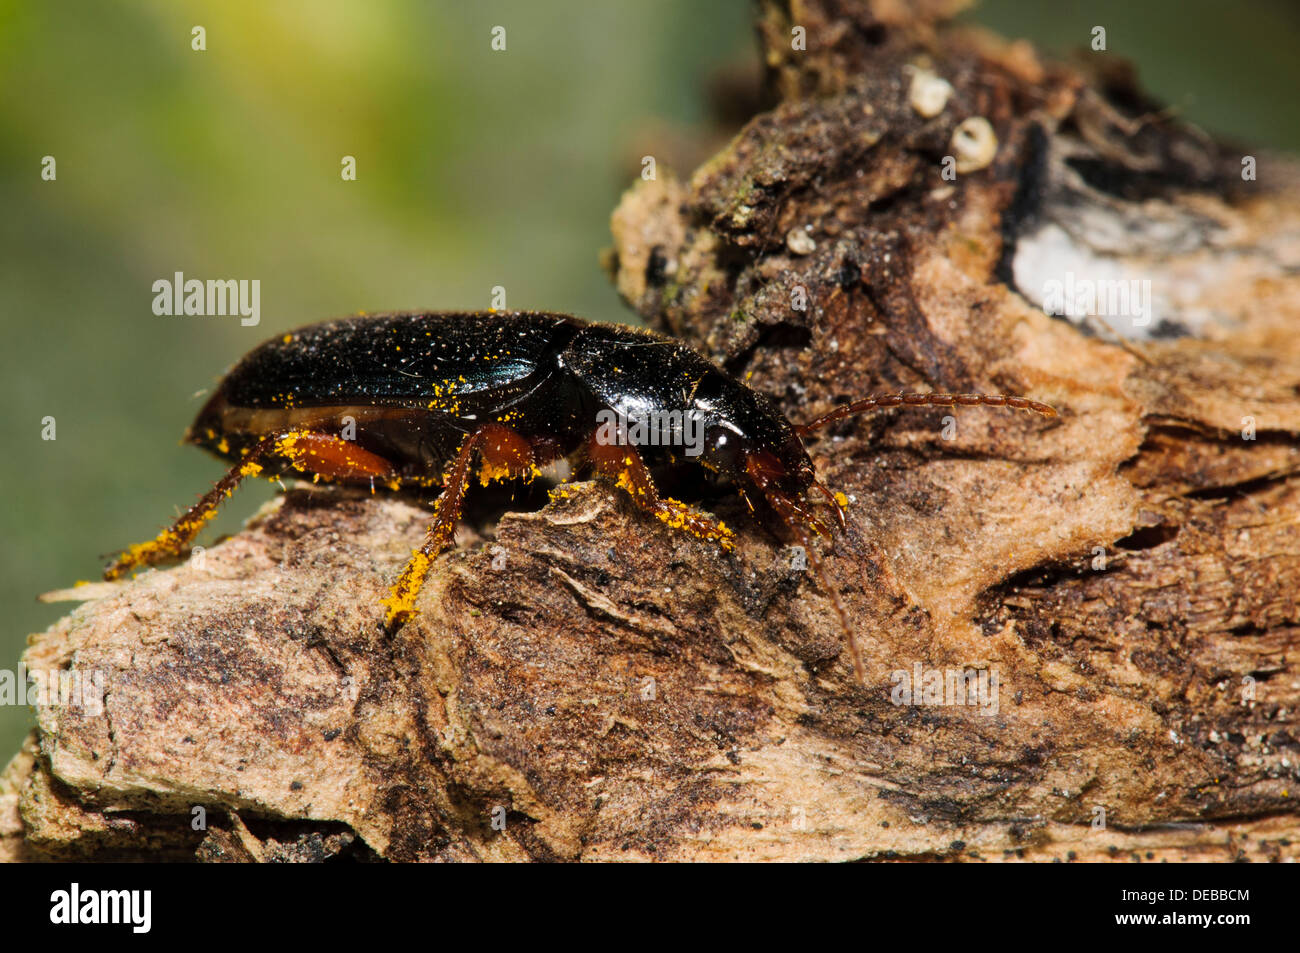 An adult ground beetle (Harpalus affinis) liberally speckled with pollen grains and walking across dead wood in a garden Stock Photo